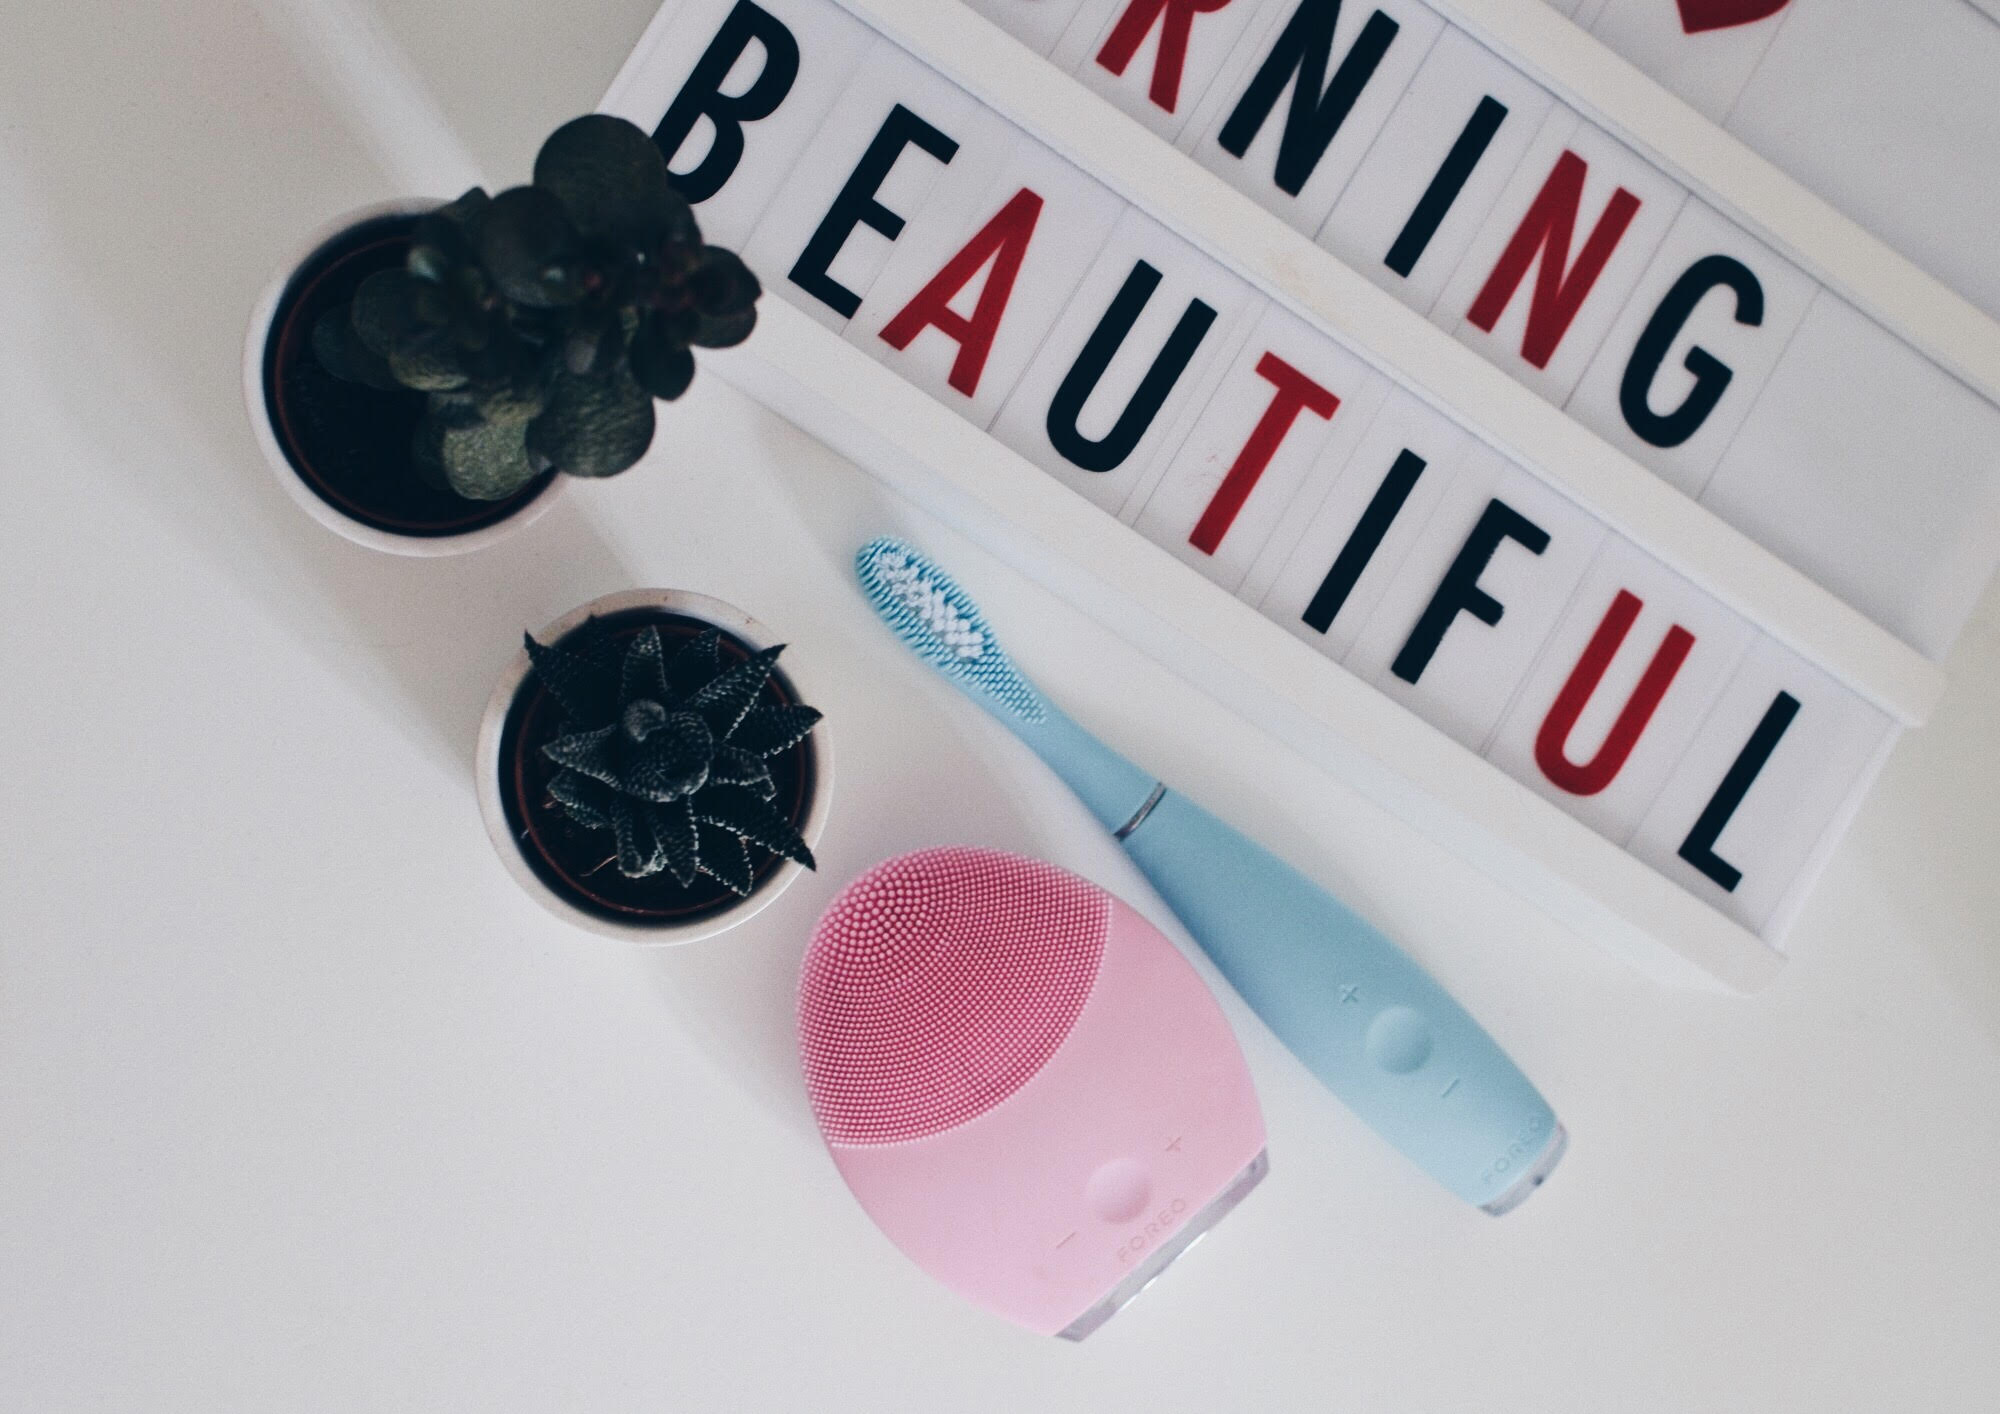 MORNING BEAUTY ROUTINE